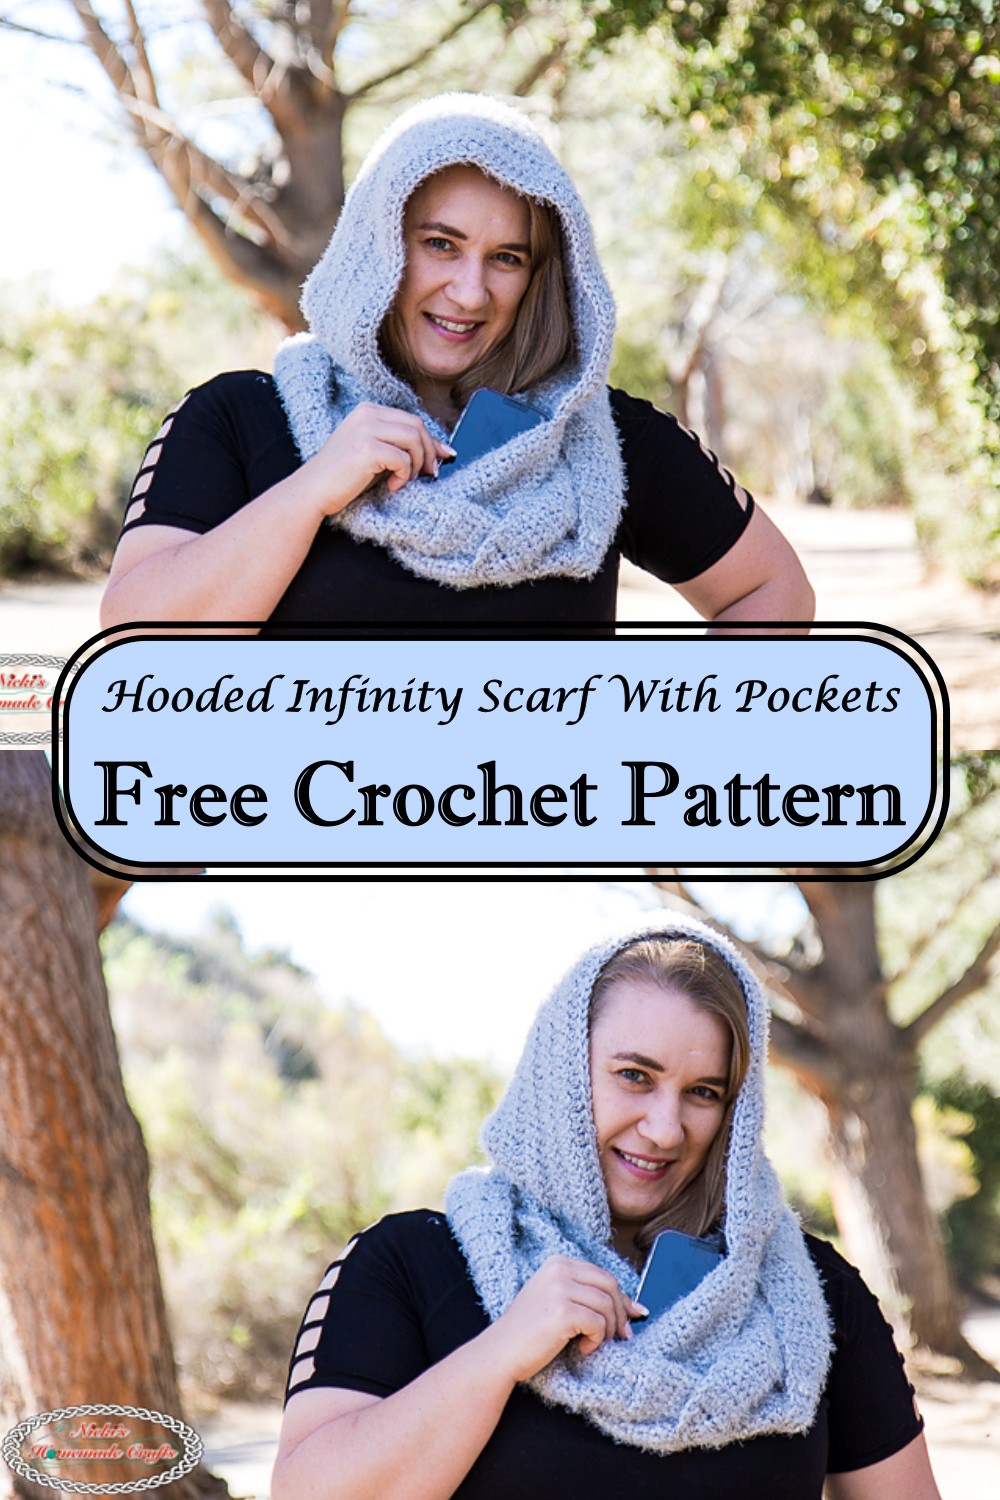 Hooded Infinity Scarf With Pockets